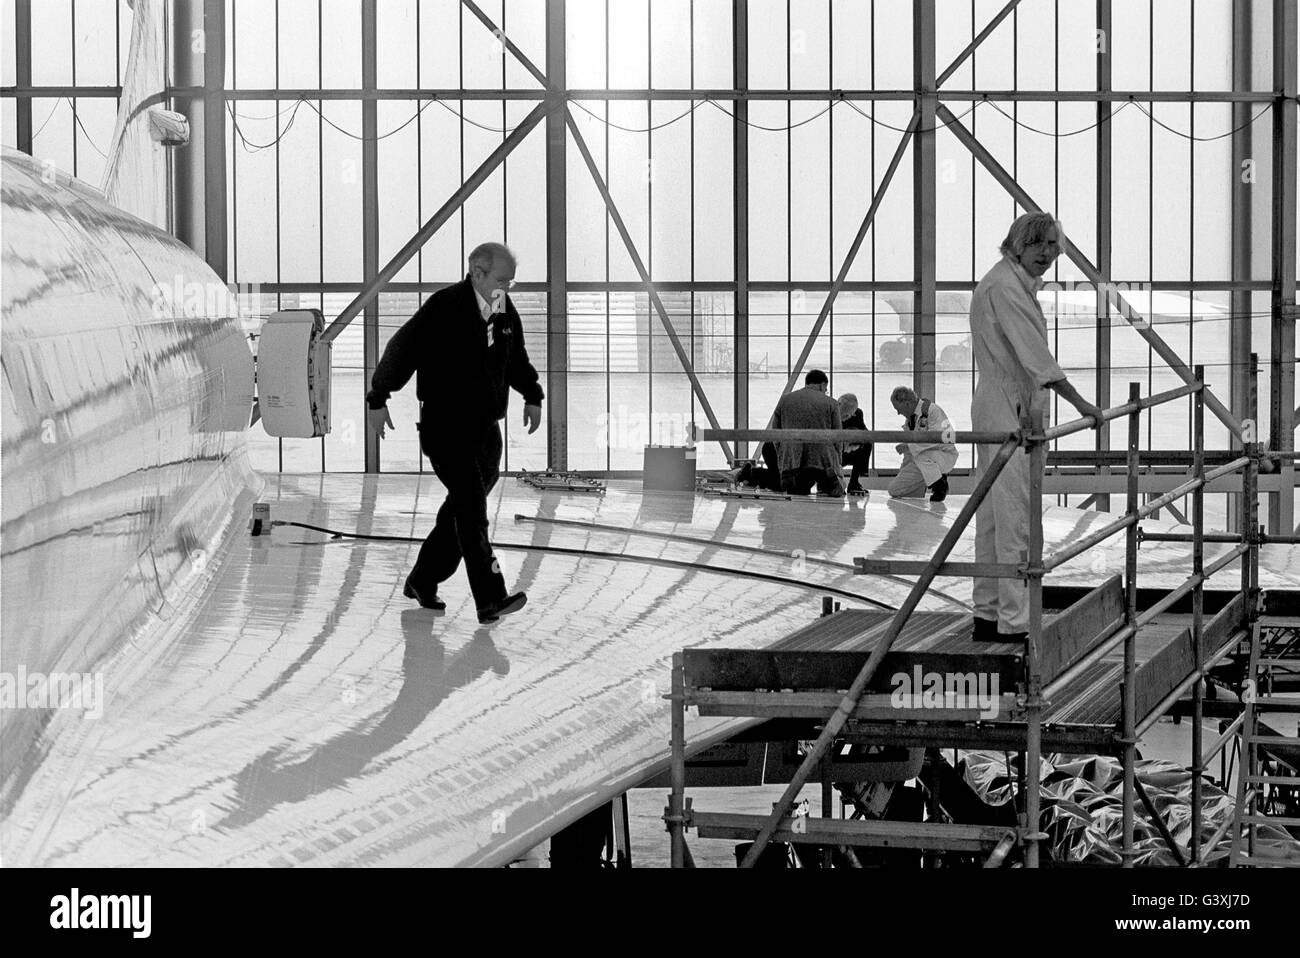 CONCORDE.  Engineers on the wing  of a Concorde  in a British Airways hanger at Heathrow Airport,  March 23rd 2001. They were modifying the fuel tanks to prevent penetration of debris from the runway after the fatal Paris Concorde crash. B&W photograph. Stock Photo